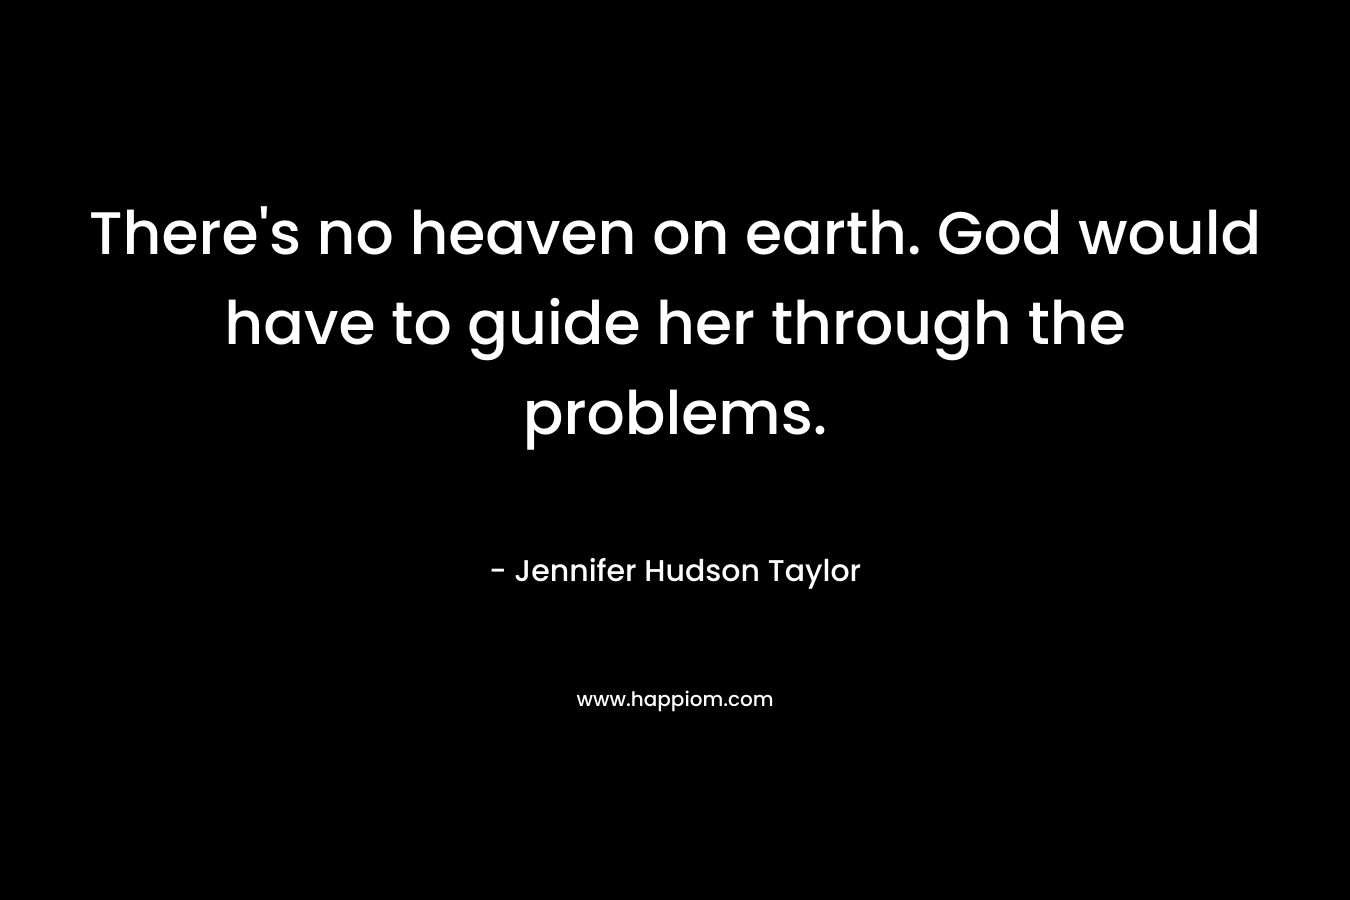 There’s no heaven on earth. God would have to guide her through the problems. – Jennifer Hudson Taylor